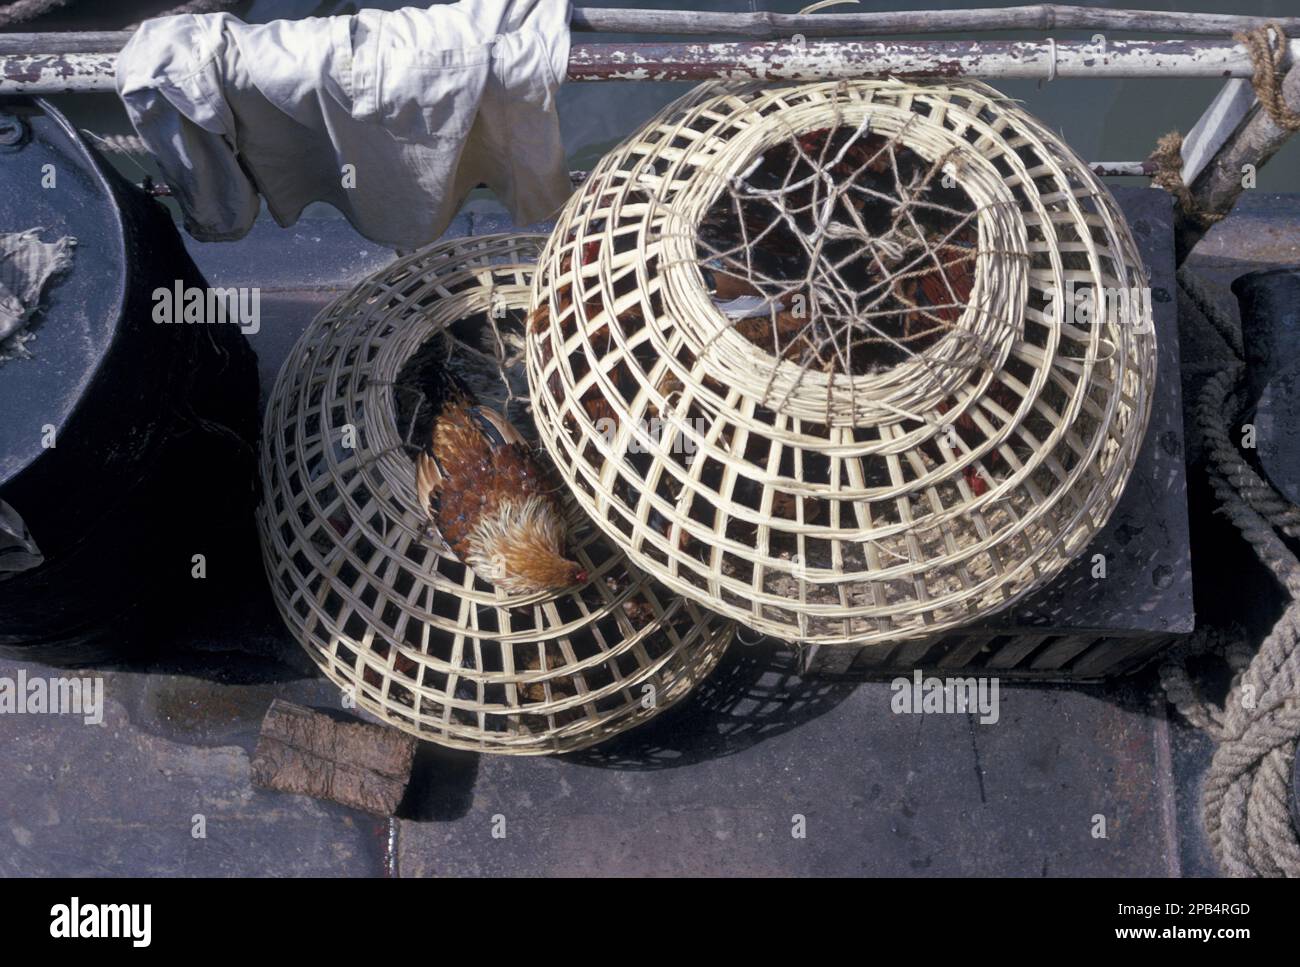 Chickens in a basket coup, sunderbans, Bangladesh, December 1967, Asia Stock Photo